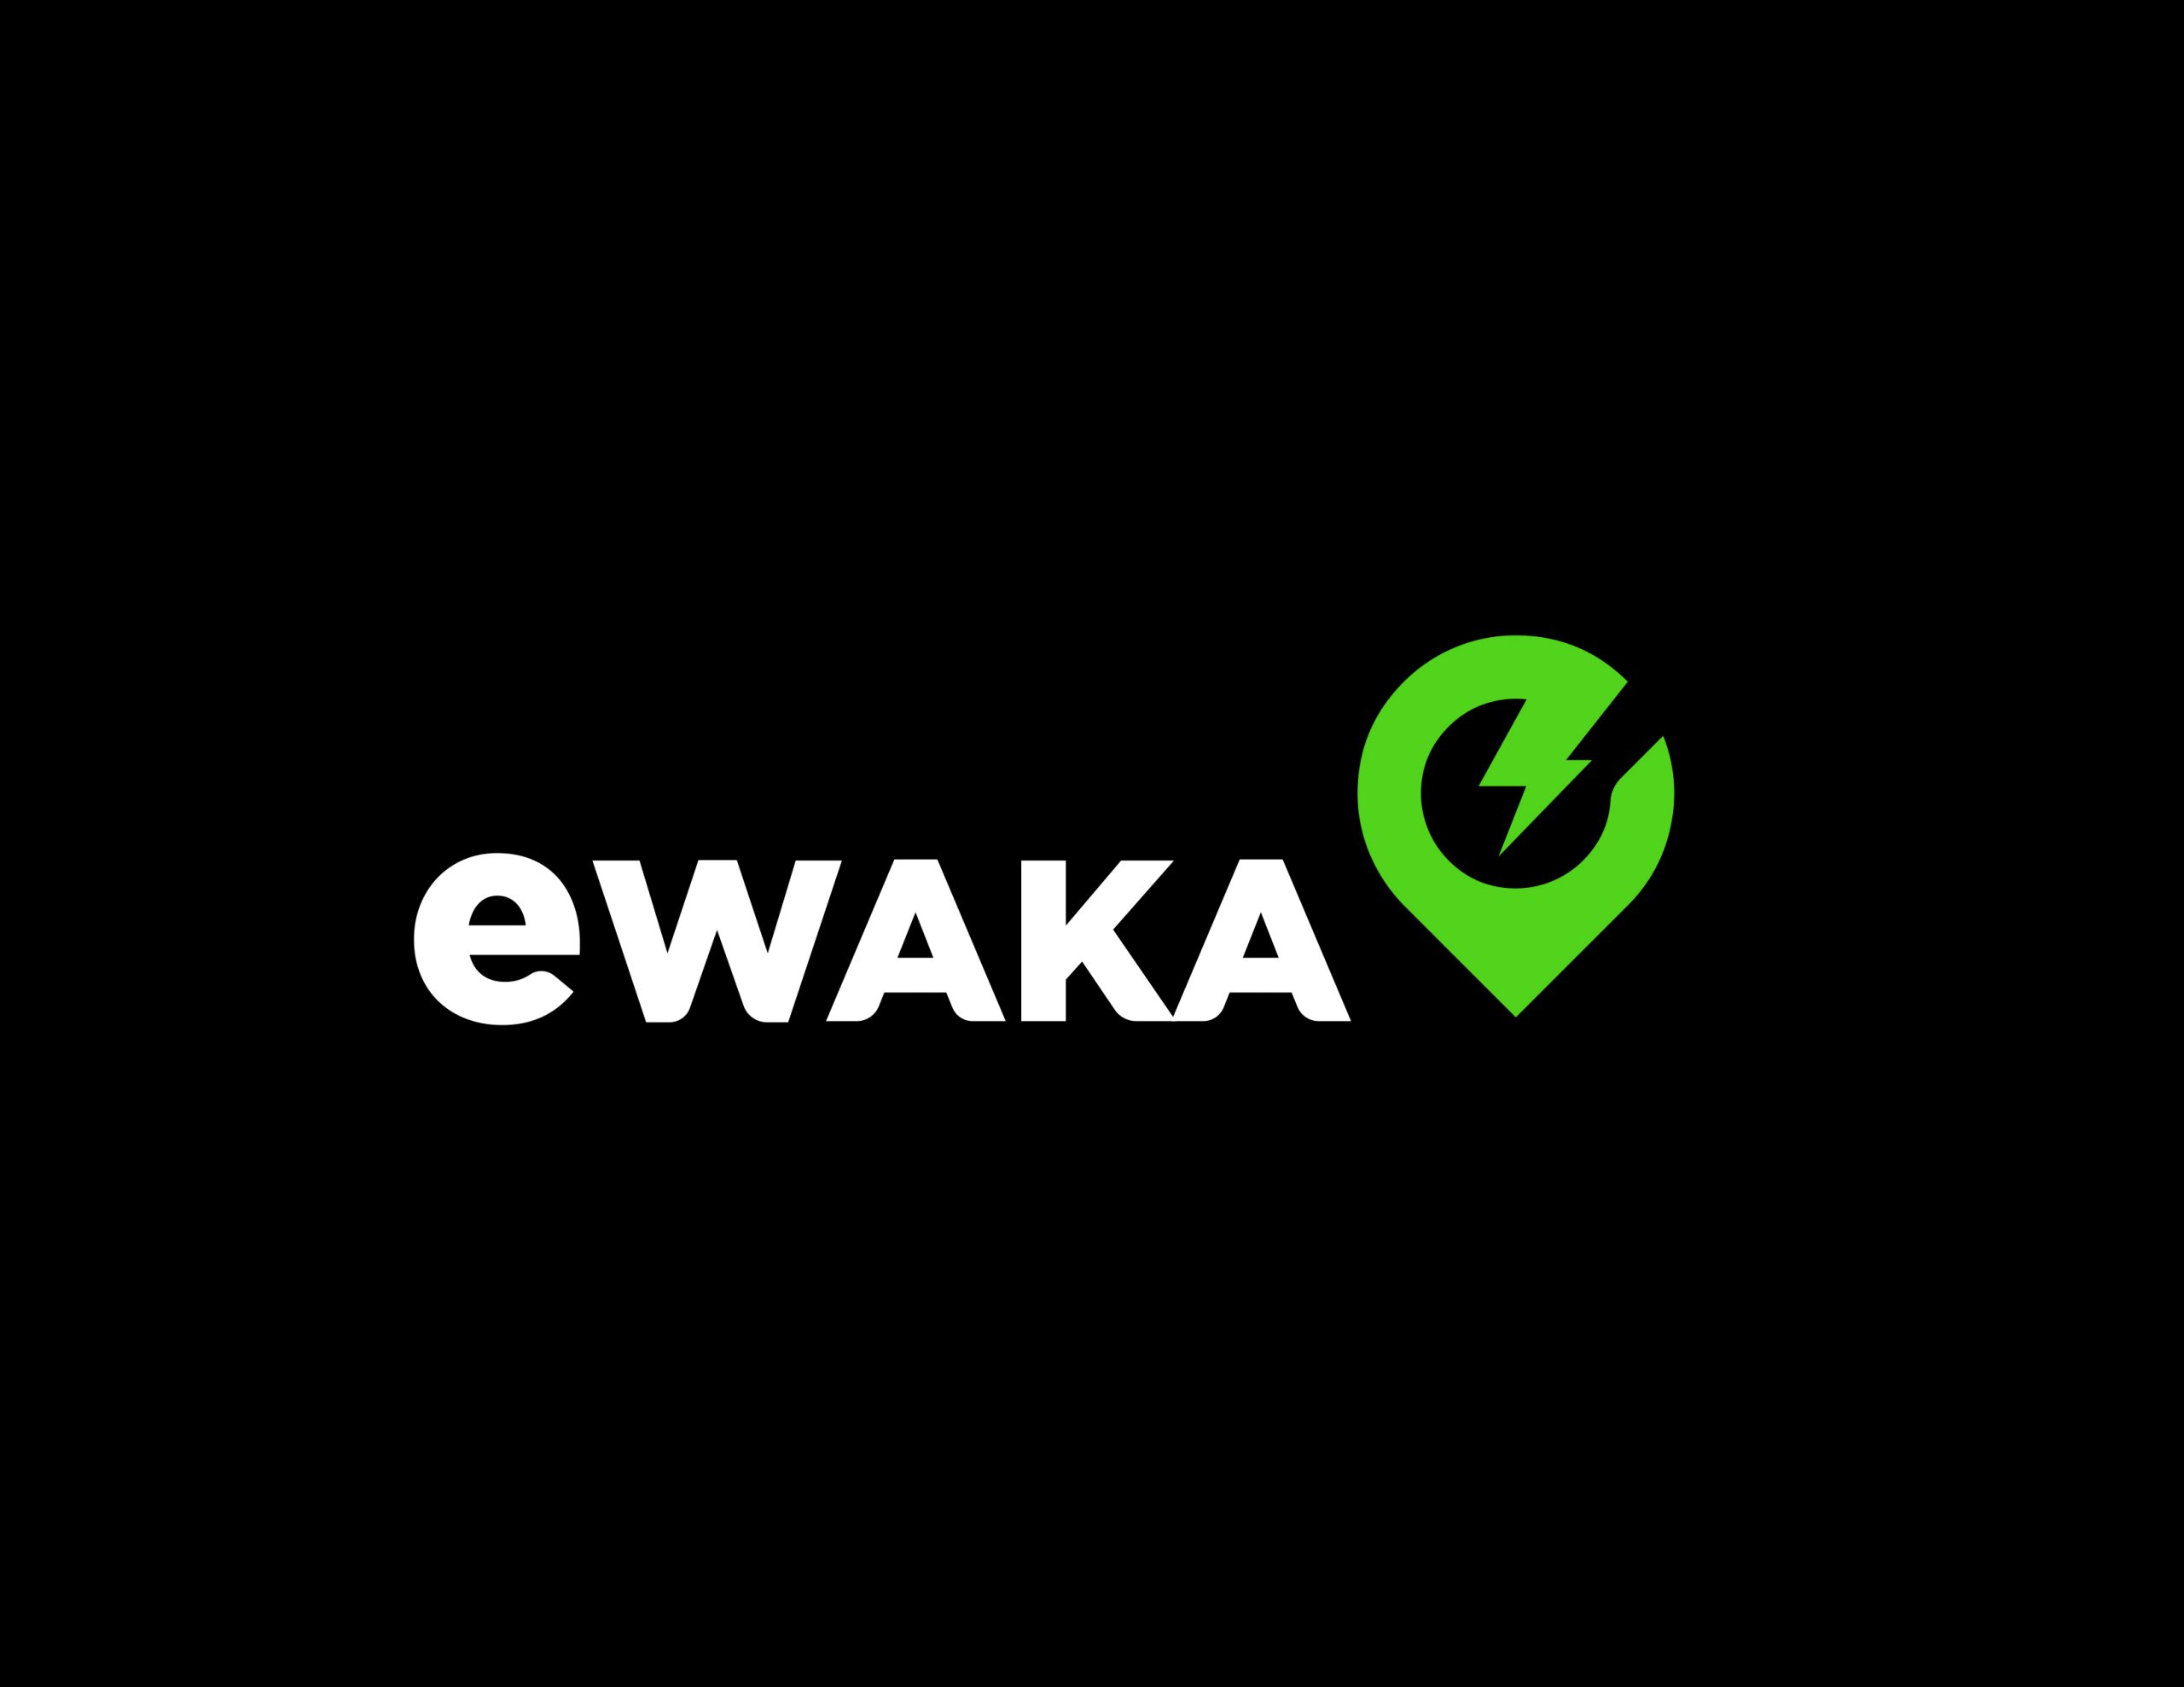 eWAKA Officially Launches Green Response to Africa’s Expanding Transportation